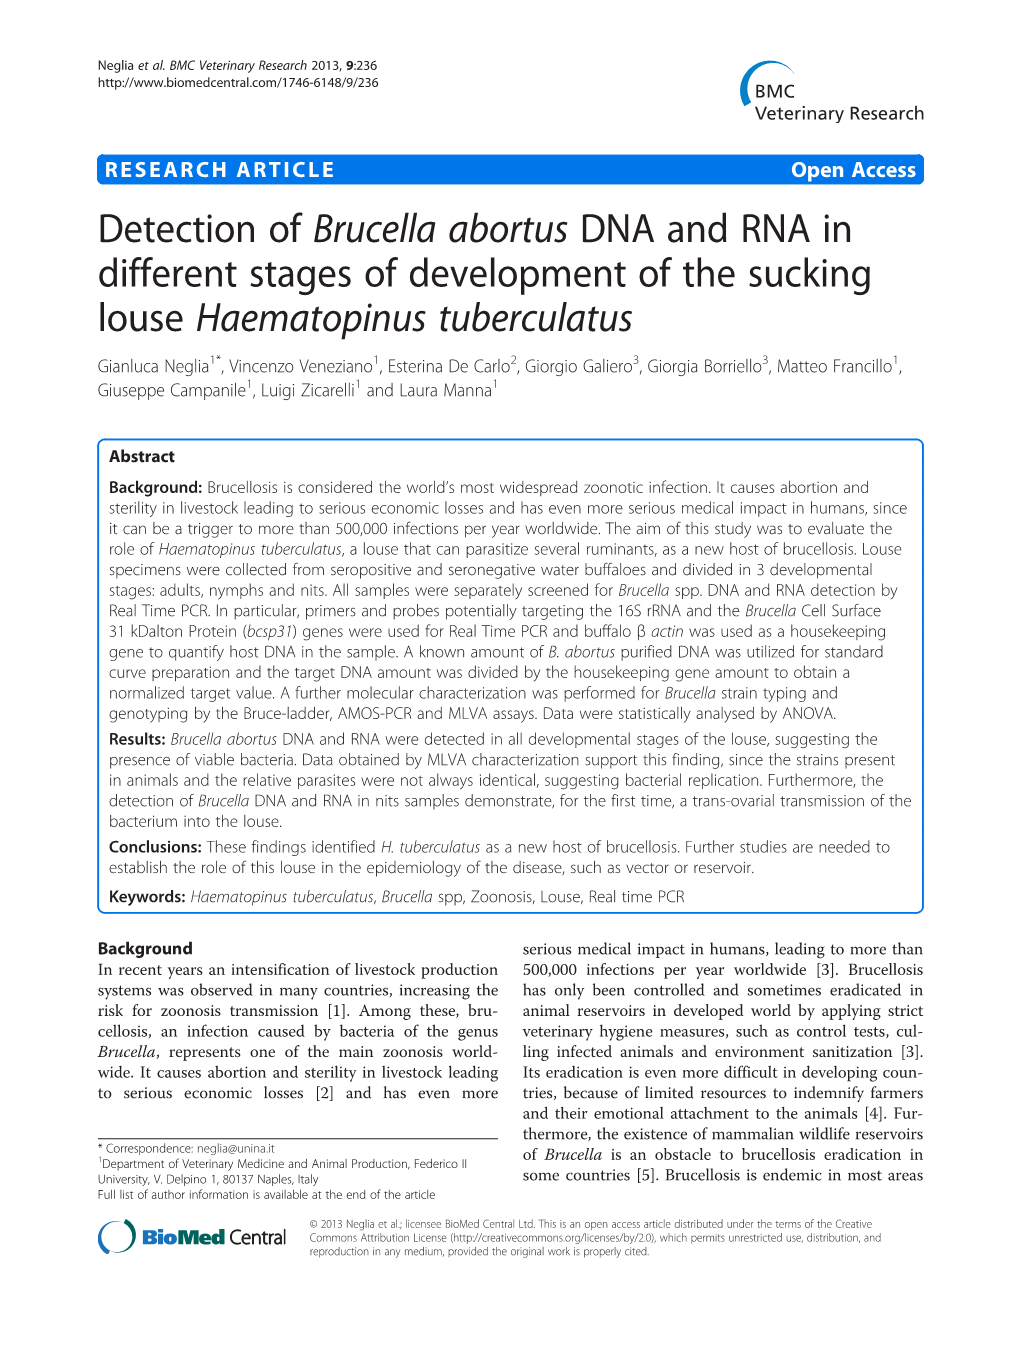 Detection of Brucella Abortus DNA and RNA in Different Stages Of